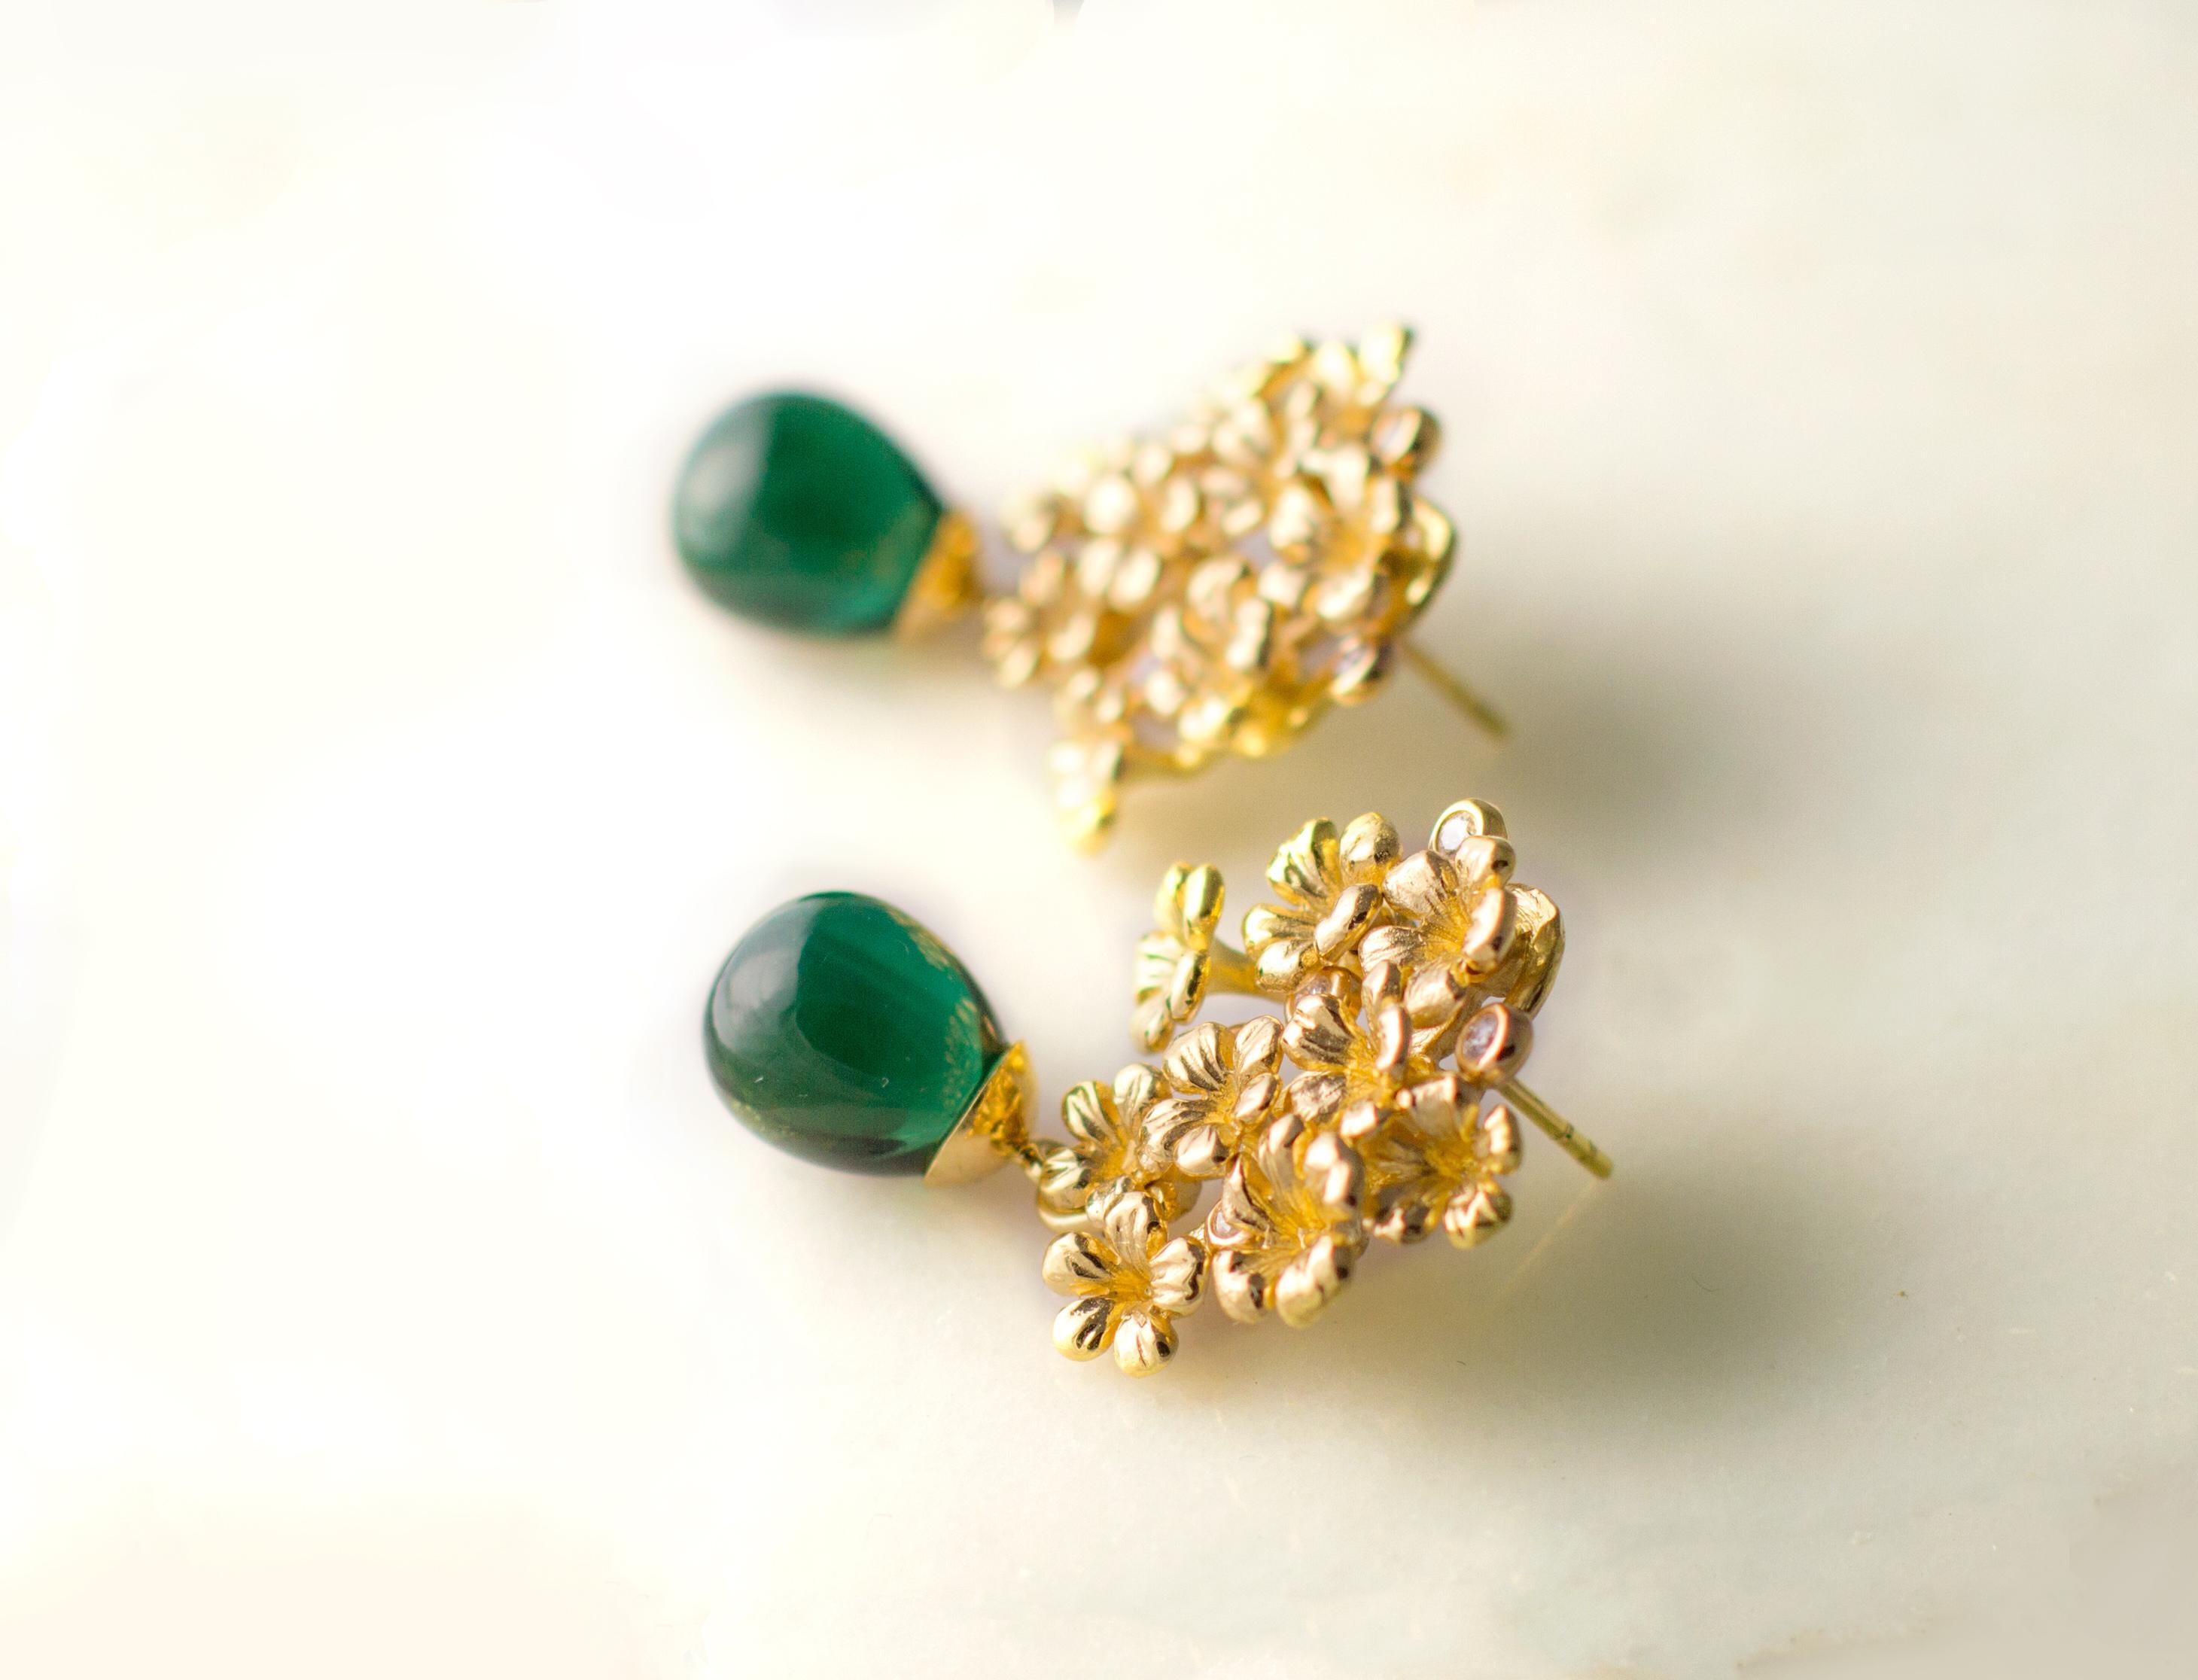 These Plum Flowers cocktail earrings with green tourmaline cabochons are crafted from 14 karat rose gold and adorned with 10 round diamonds. This piece is part of a contemporary jewellery collection that was reviewed by Vogue UA in November. We use